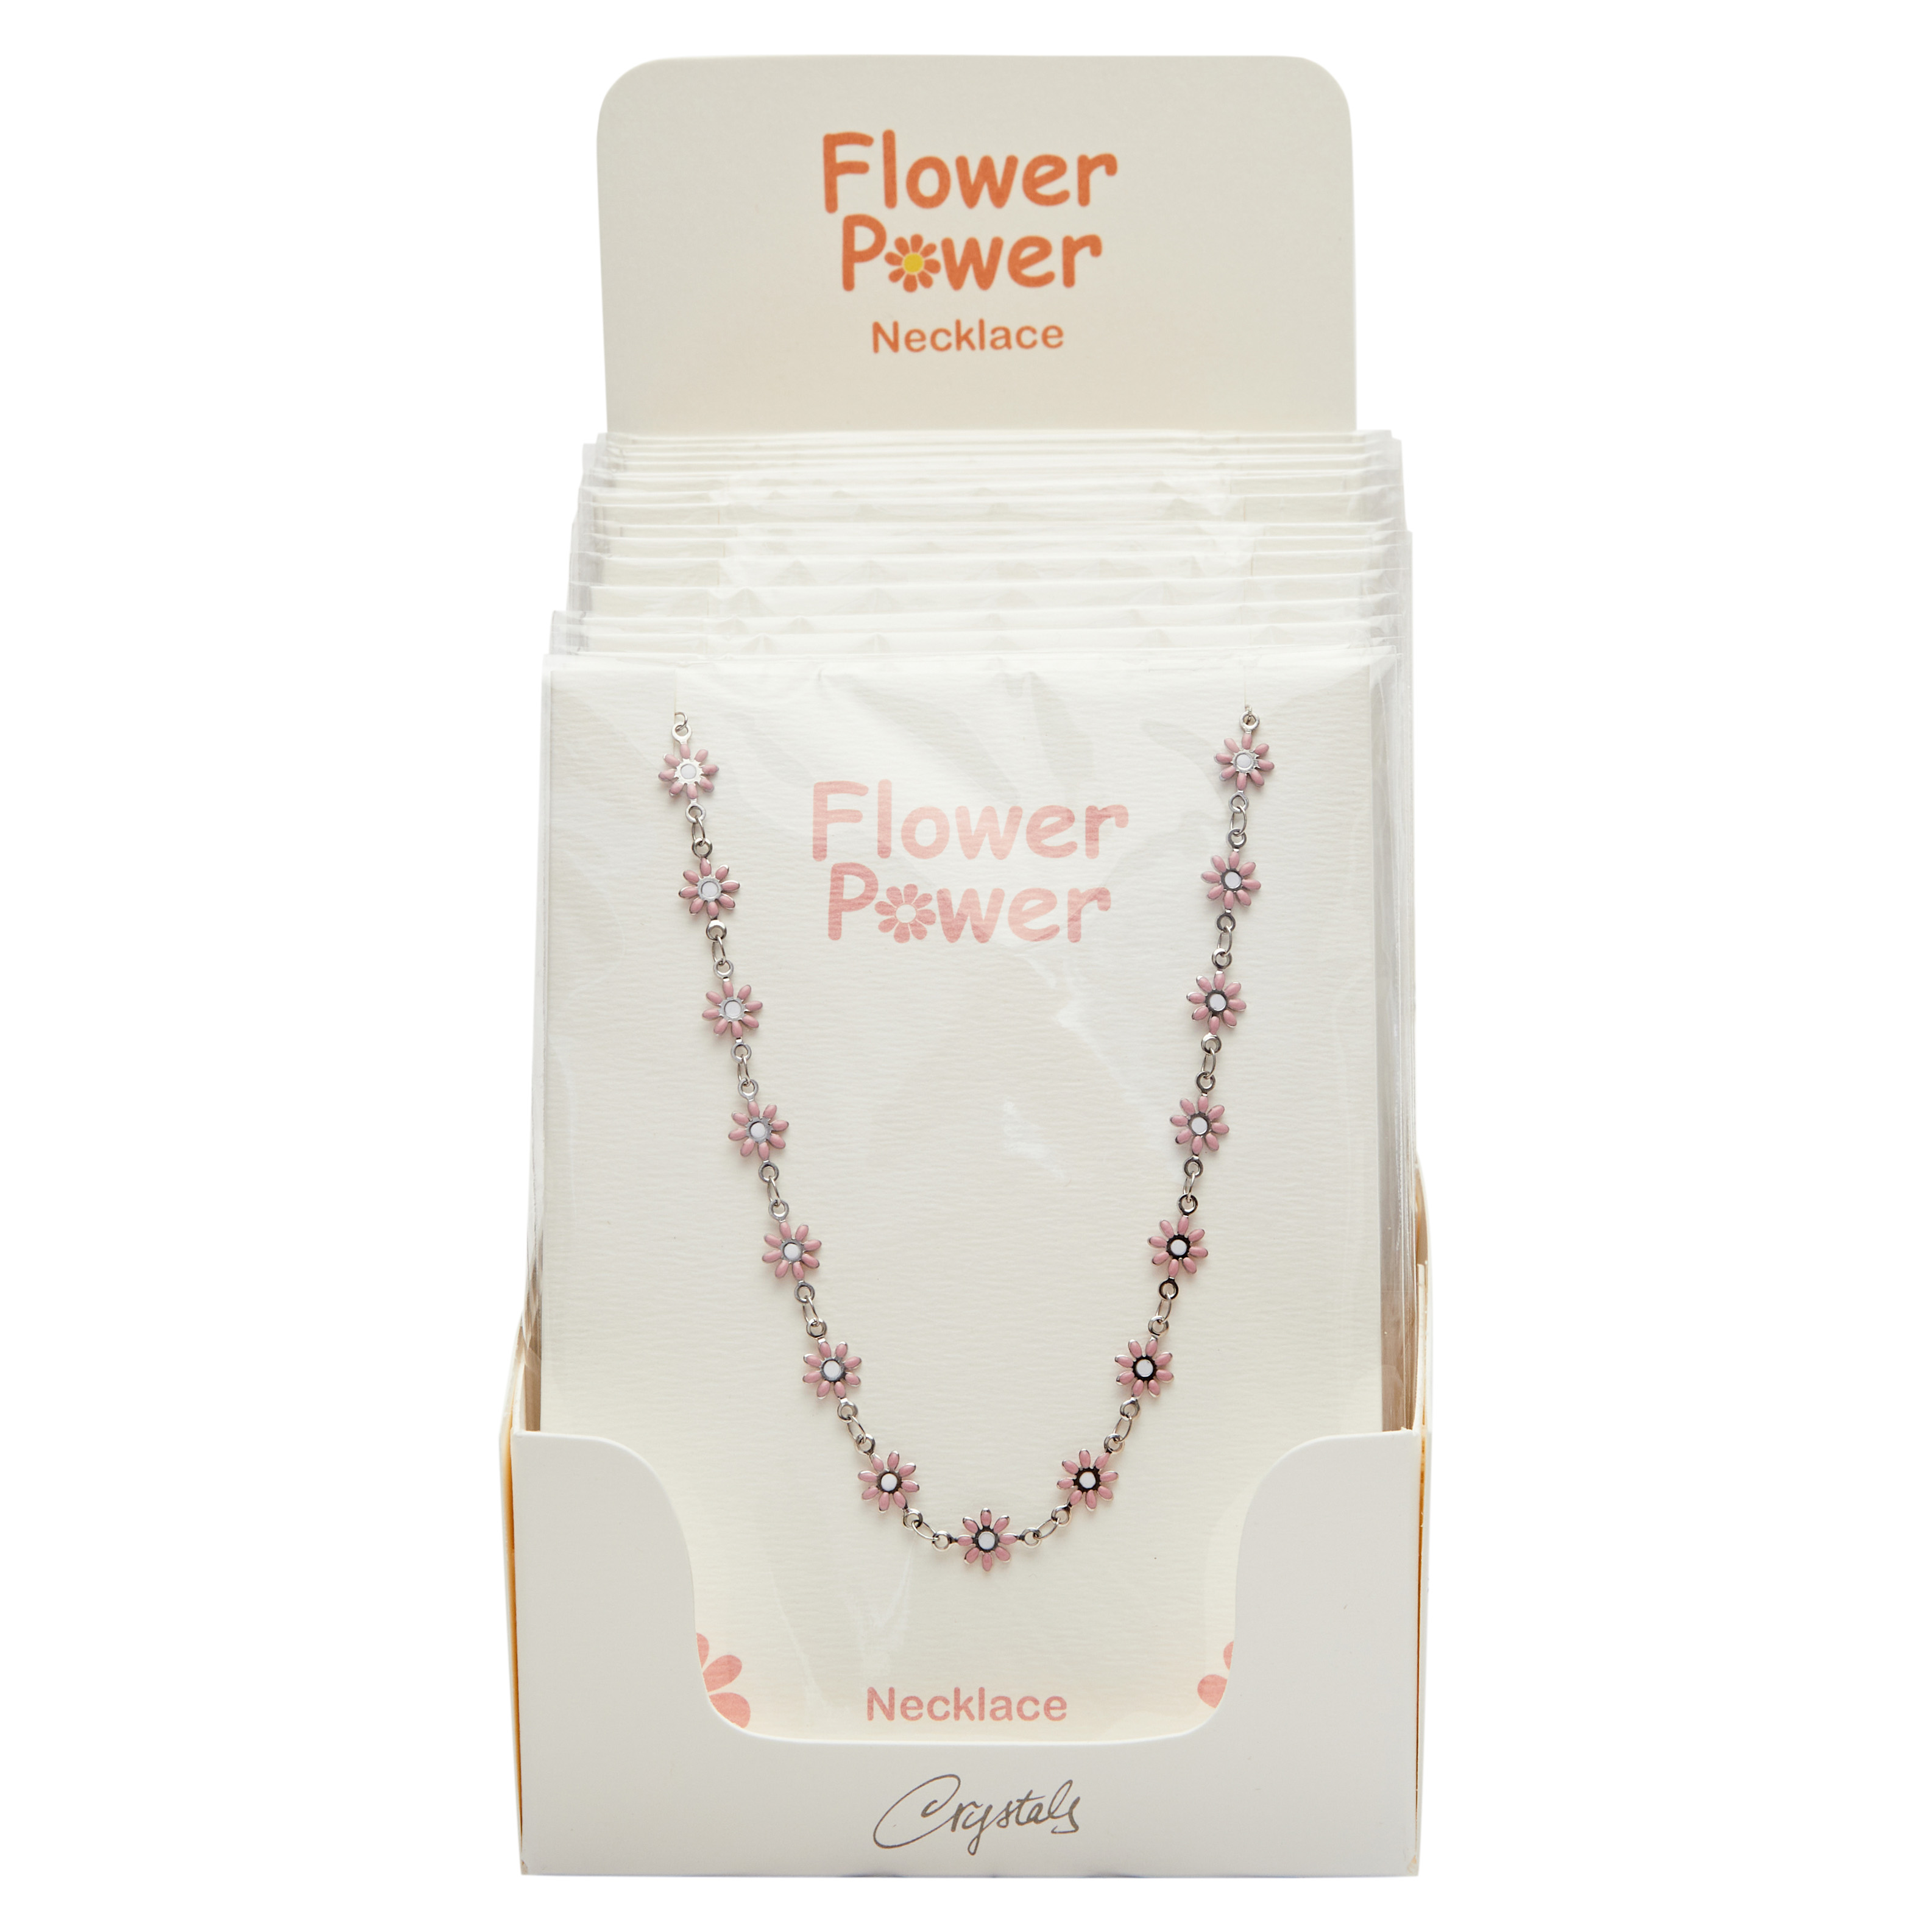 Display necklaces "Flower Power"